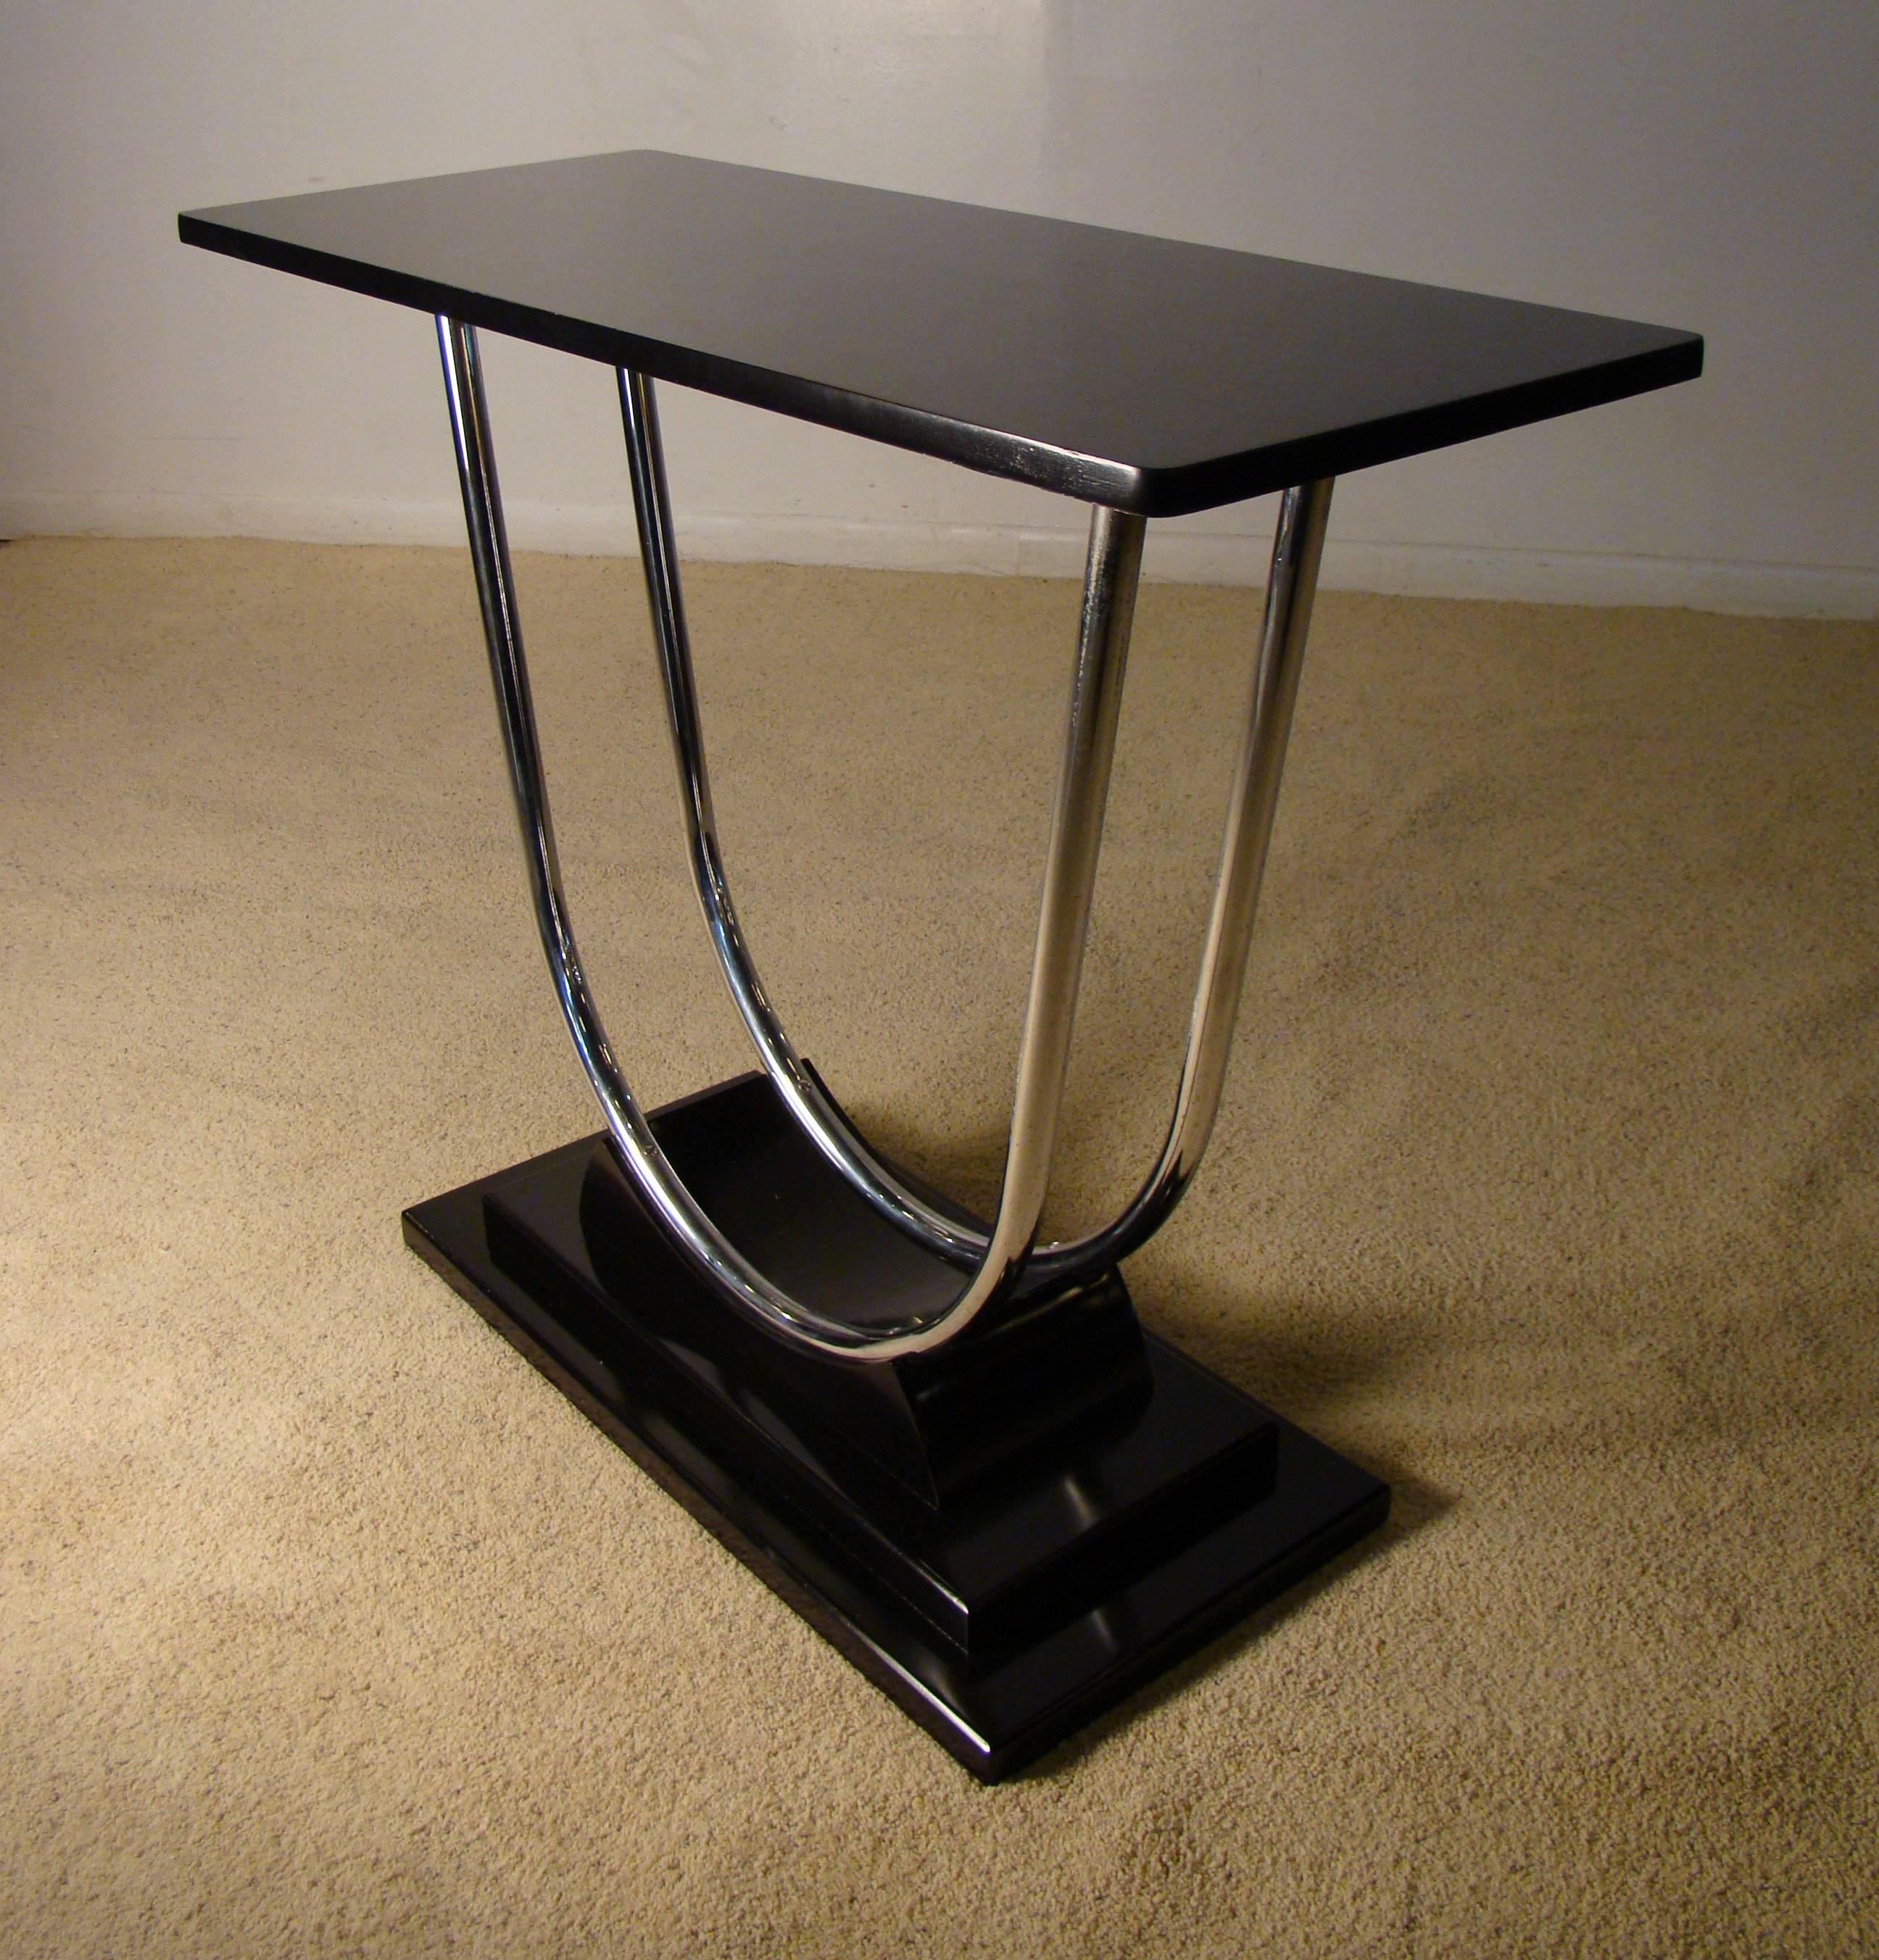 Lacquered Stunning Art Deco Machine Age Streamline Chrome Console Table, circa 1930s For Sale